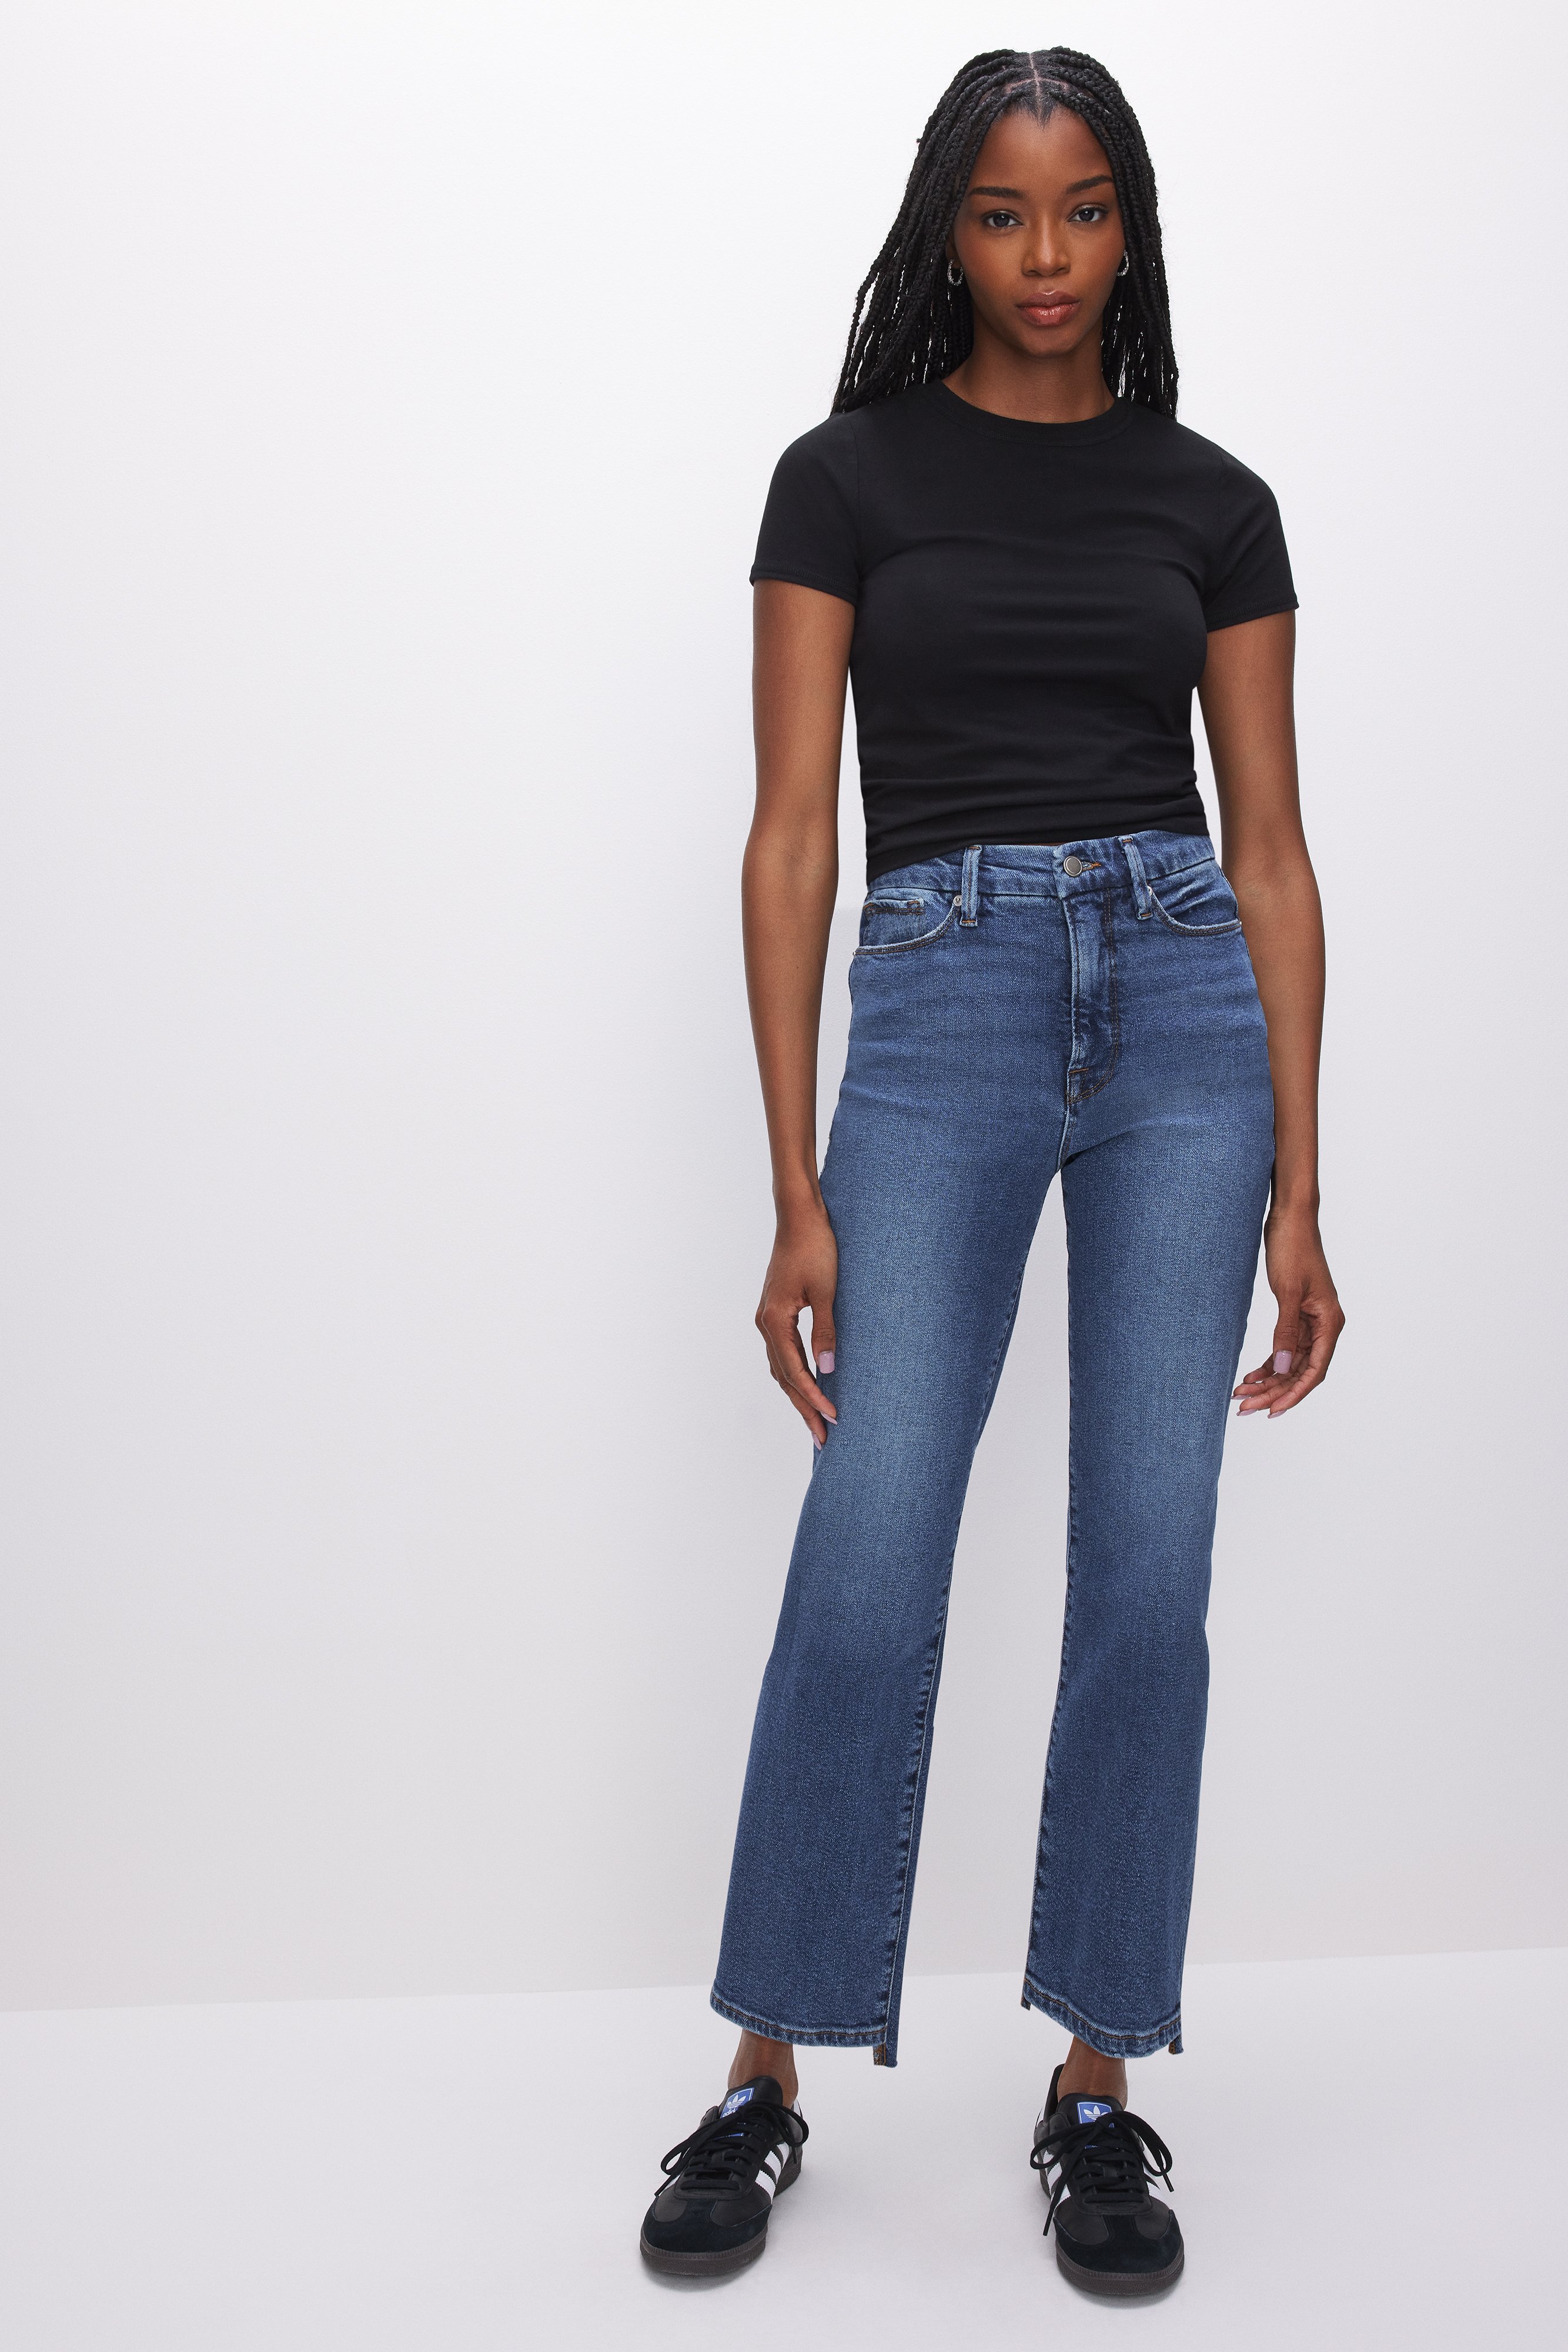 Styled with GOOD BOY STRAIGHT CROPPED JEANS | INDIGO394